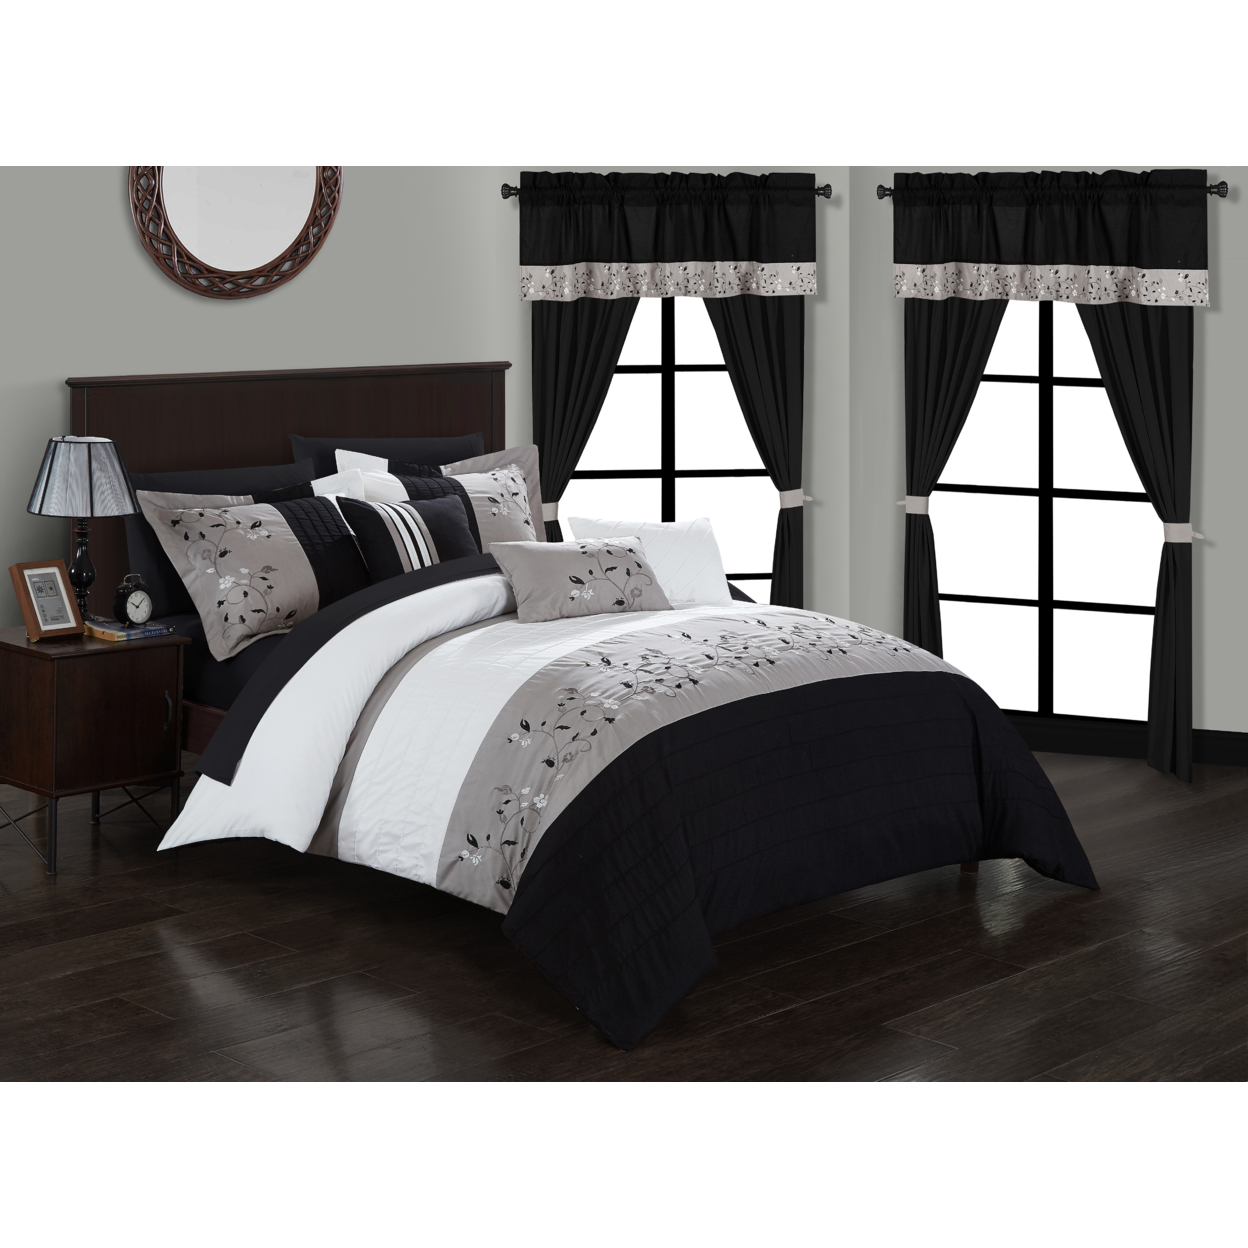 Sonita 20-Piece Bedding Set With Comforter, Sheets & Curtains, Mult. Colors - Brown, Queen